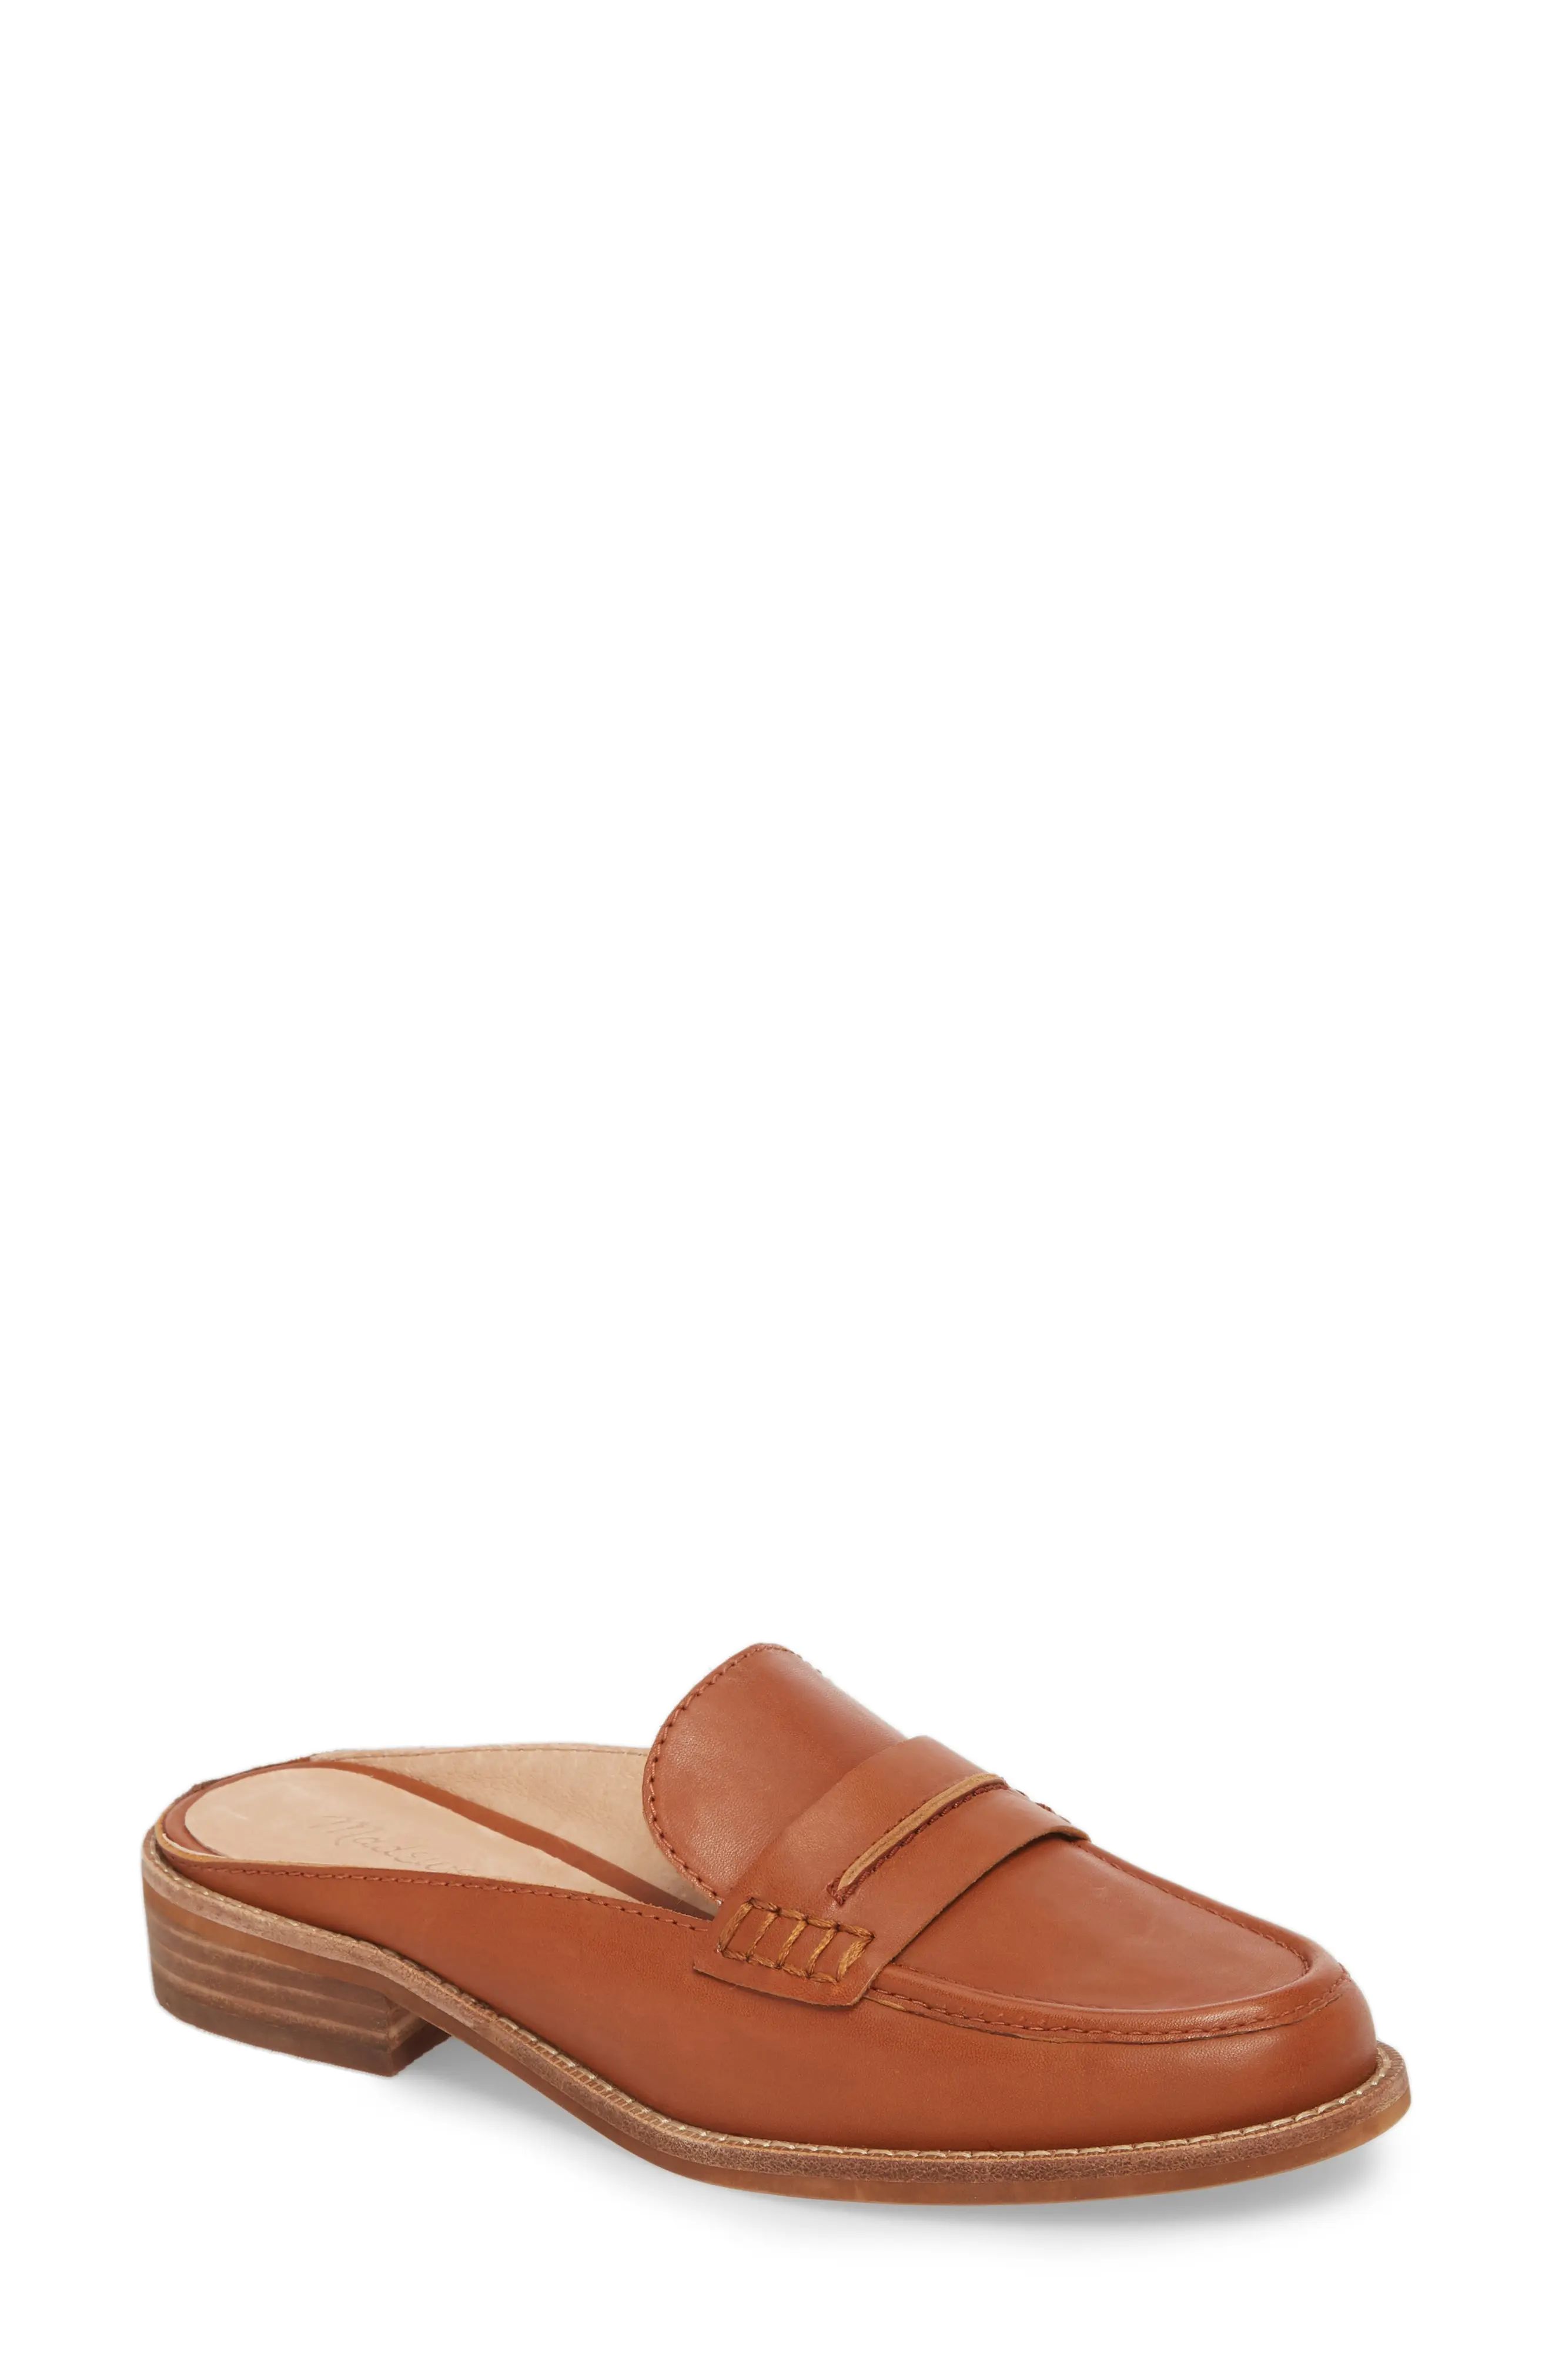 Madewell The Elinor Loafer Mule (Women) | Nordstrom